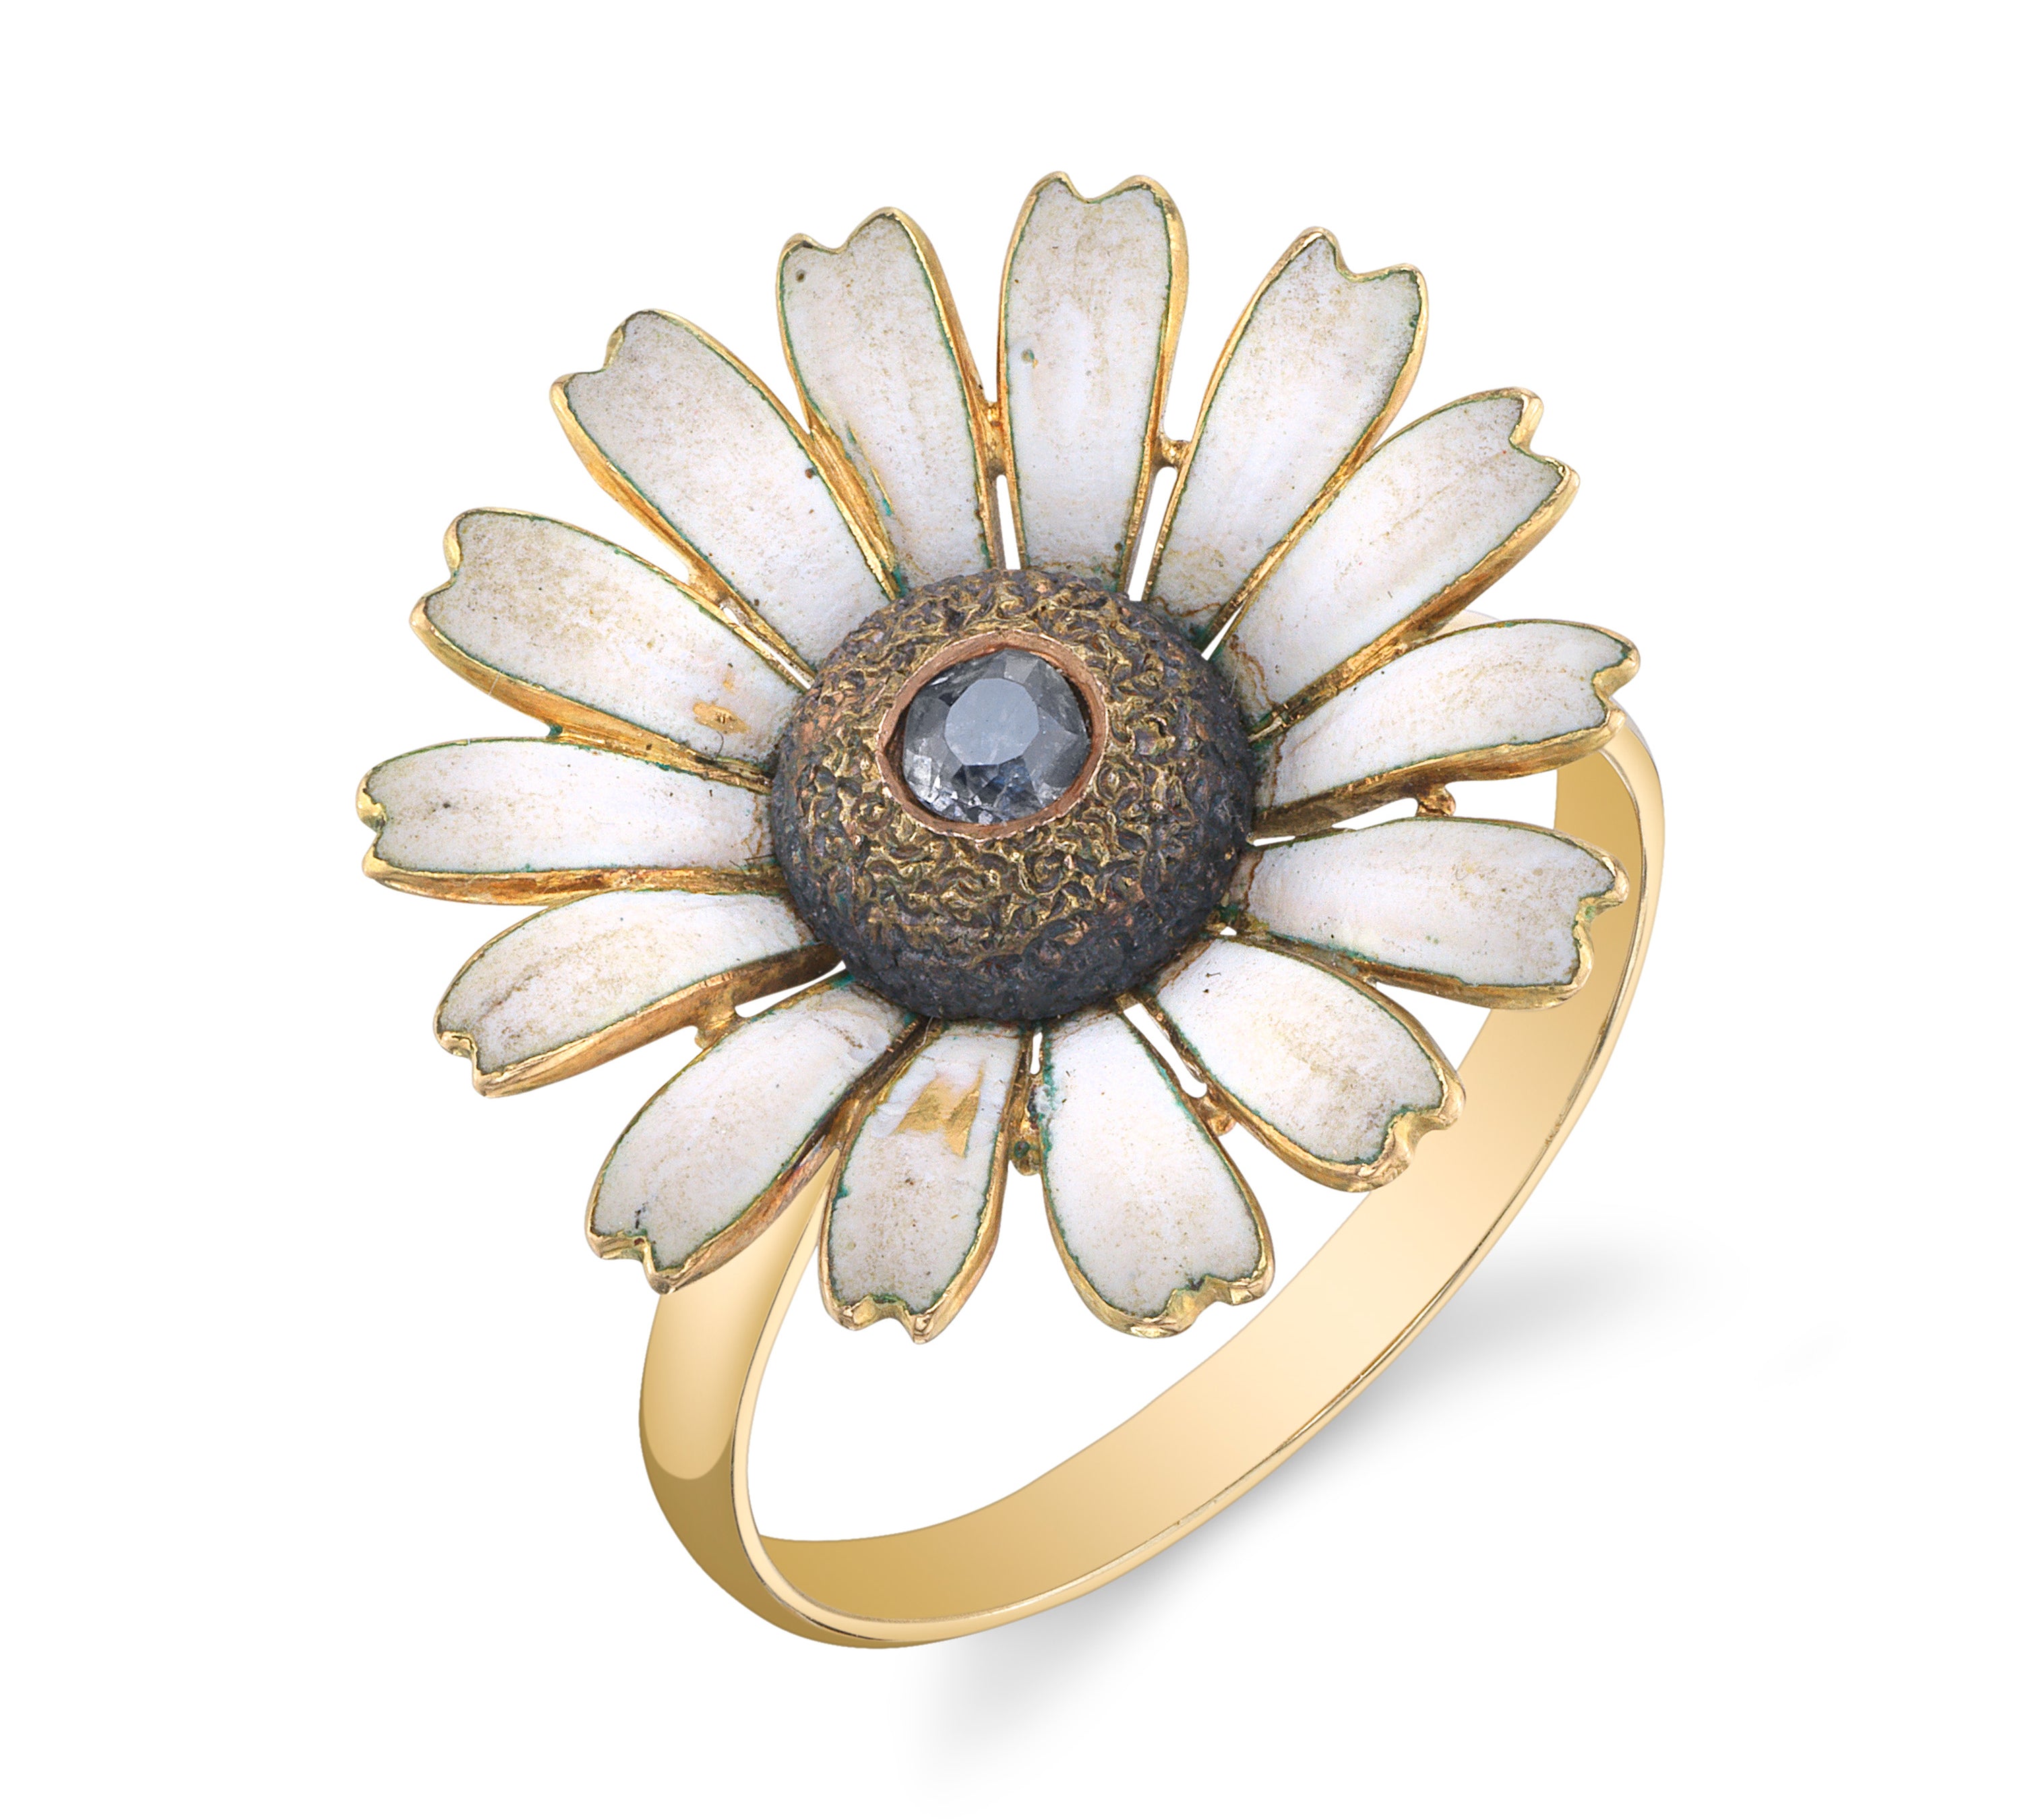 Antique Daisy Ring with Rosecut Diamond Statement Roseark Vintage   